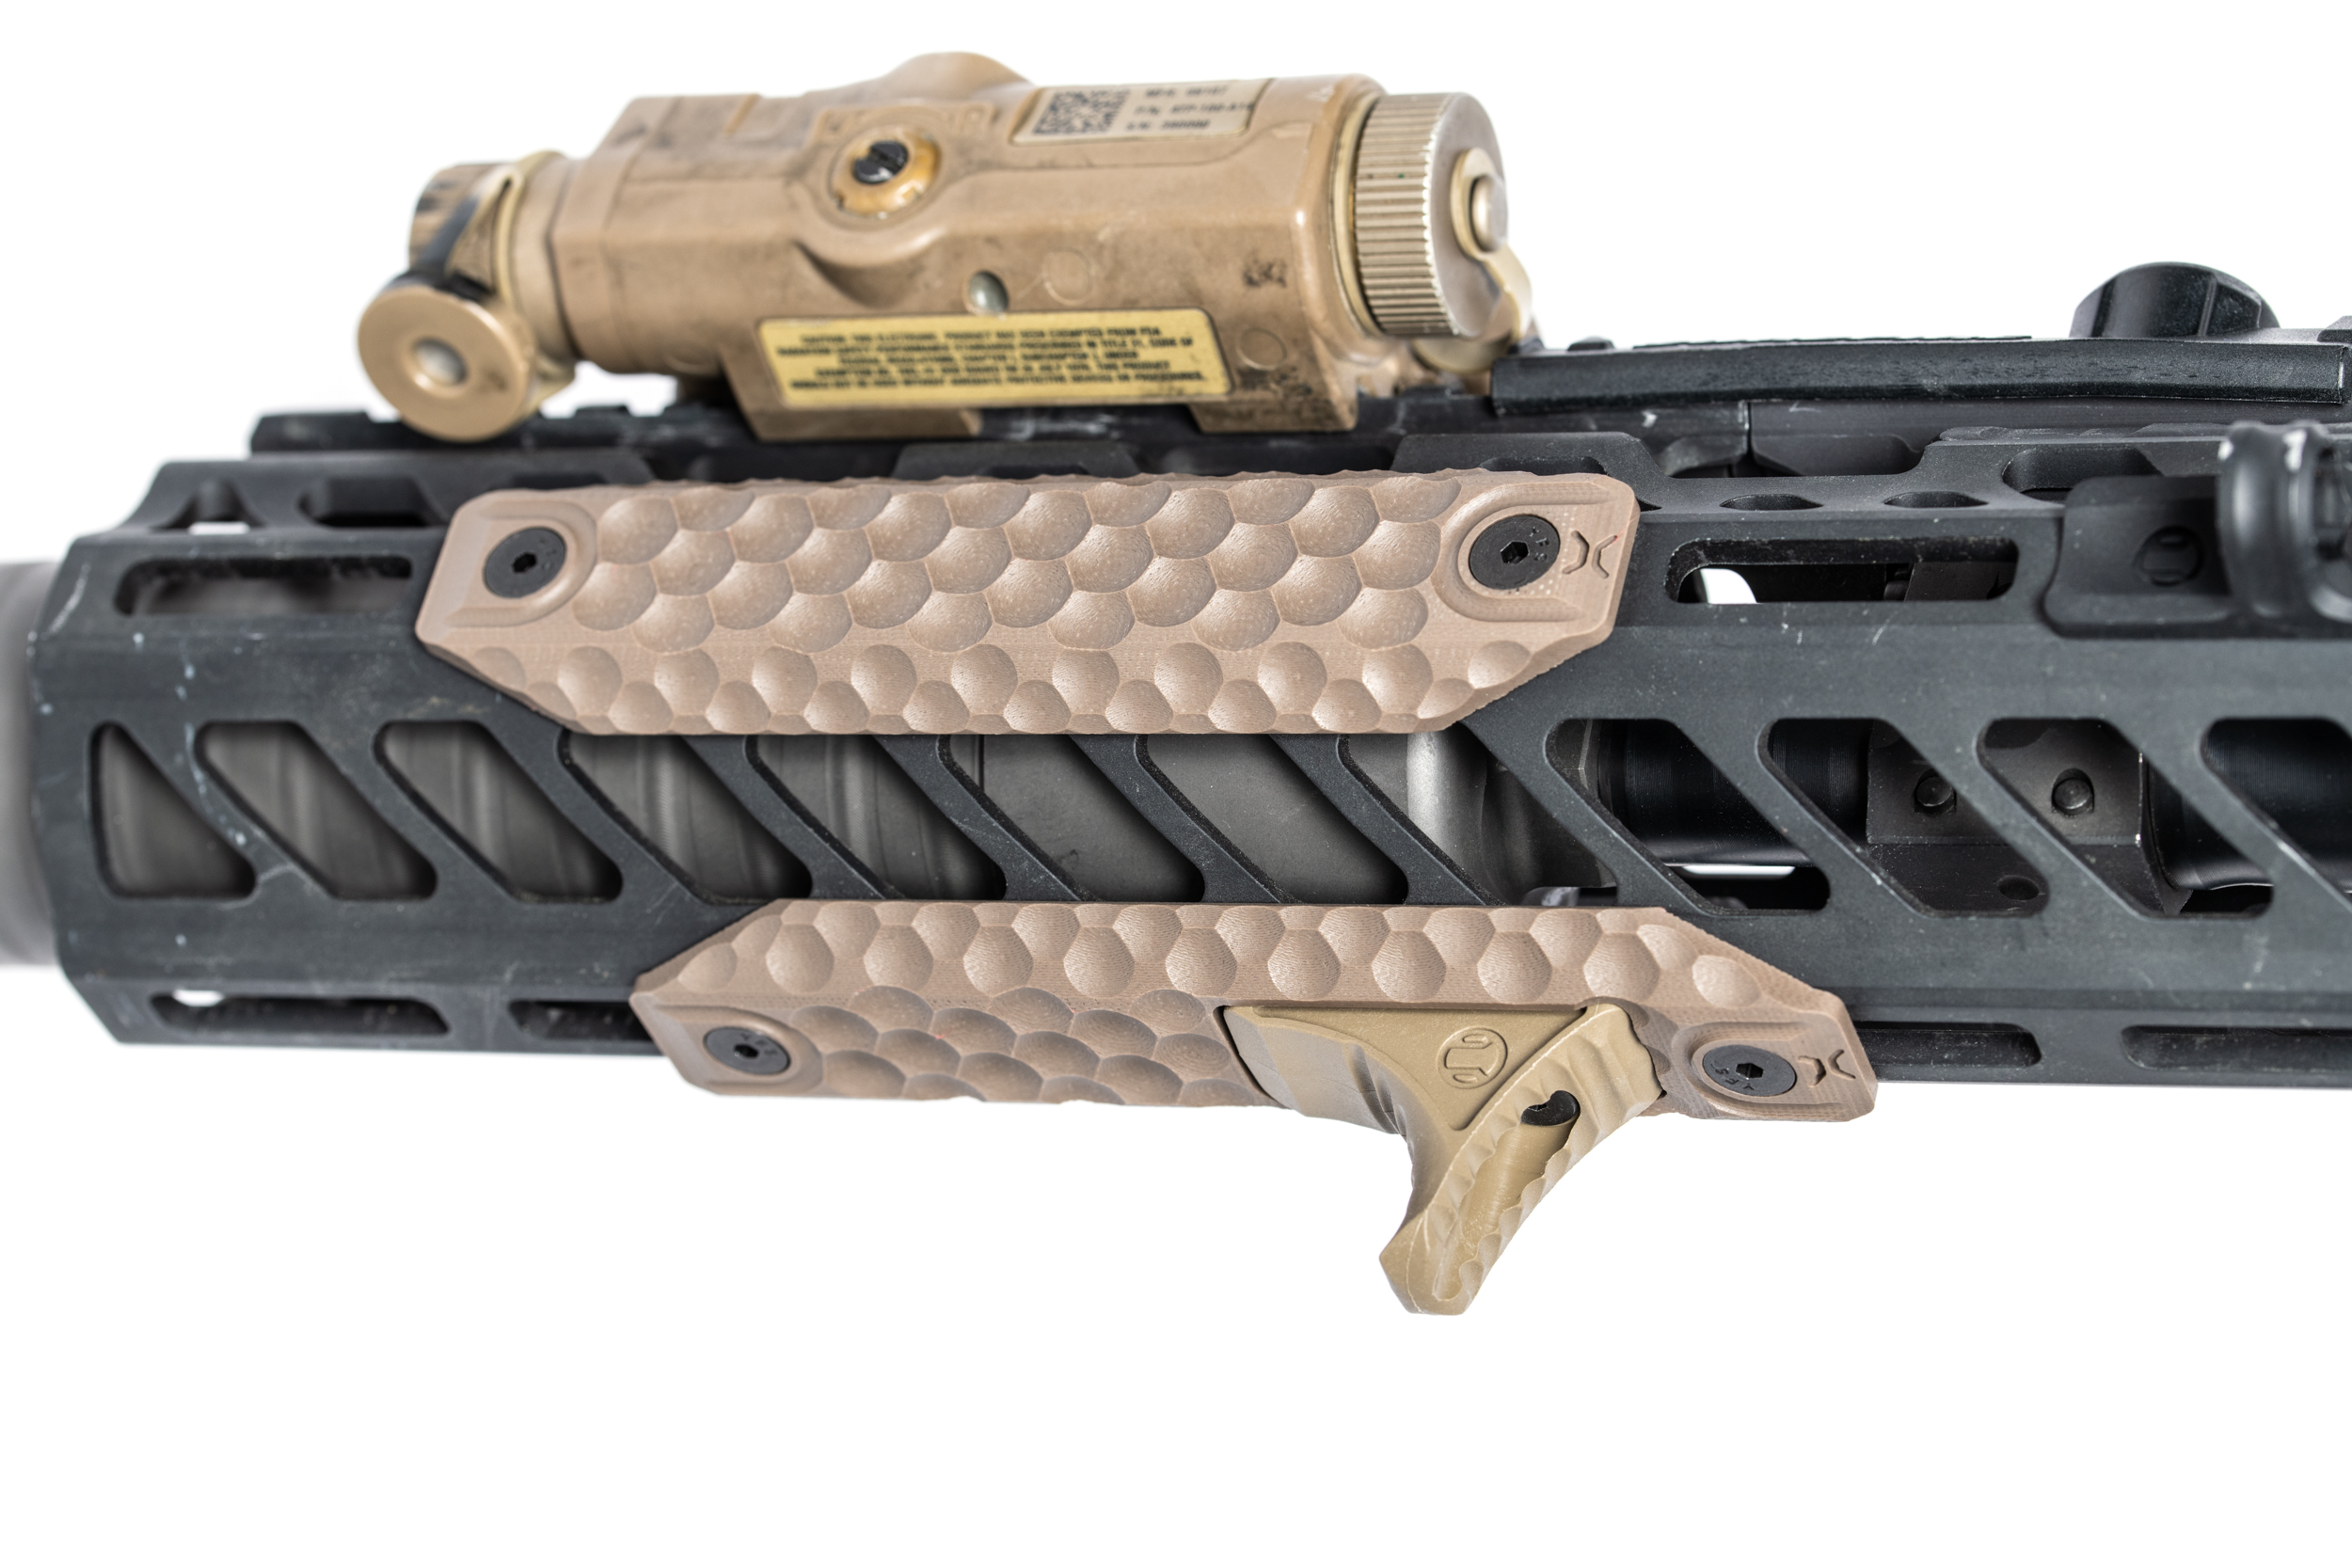 What are the best AR15 MLOK Accessories to help reduce Recoil